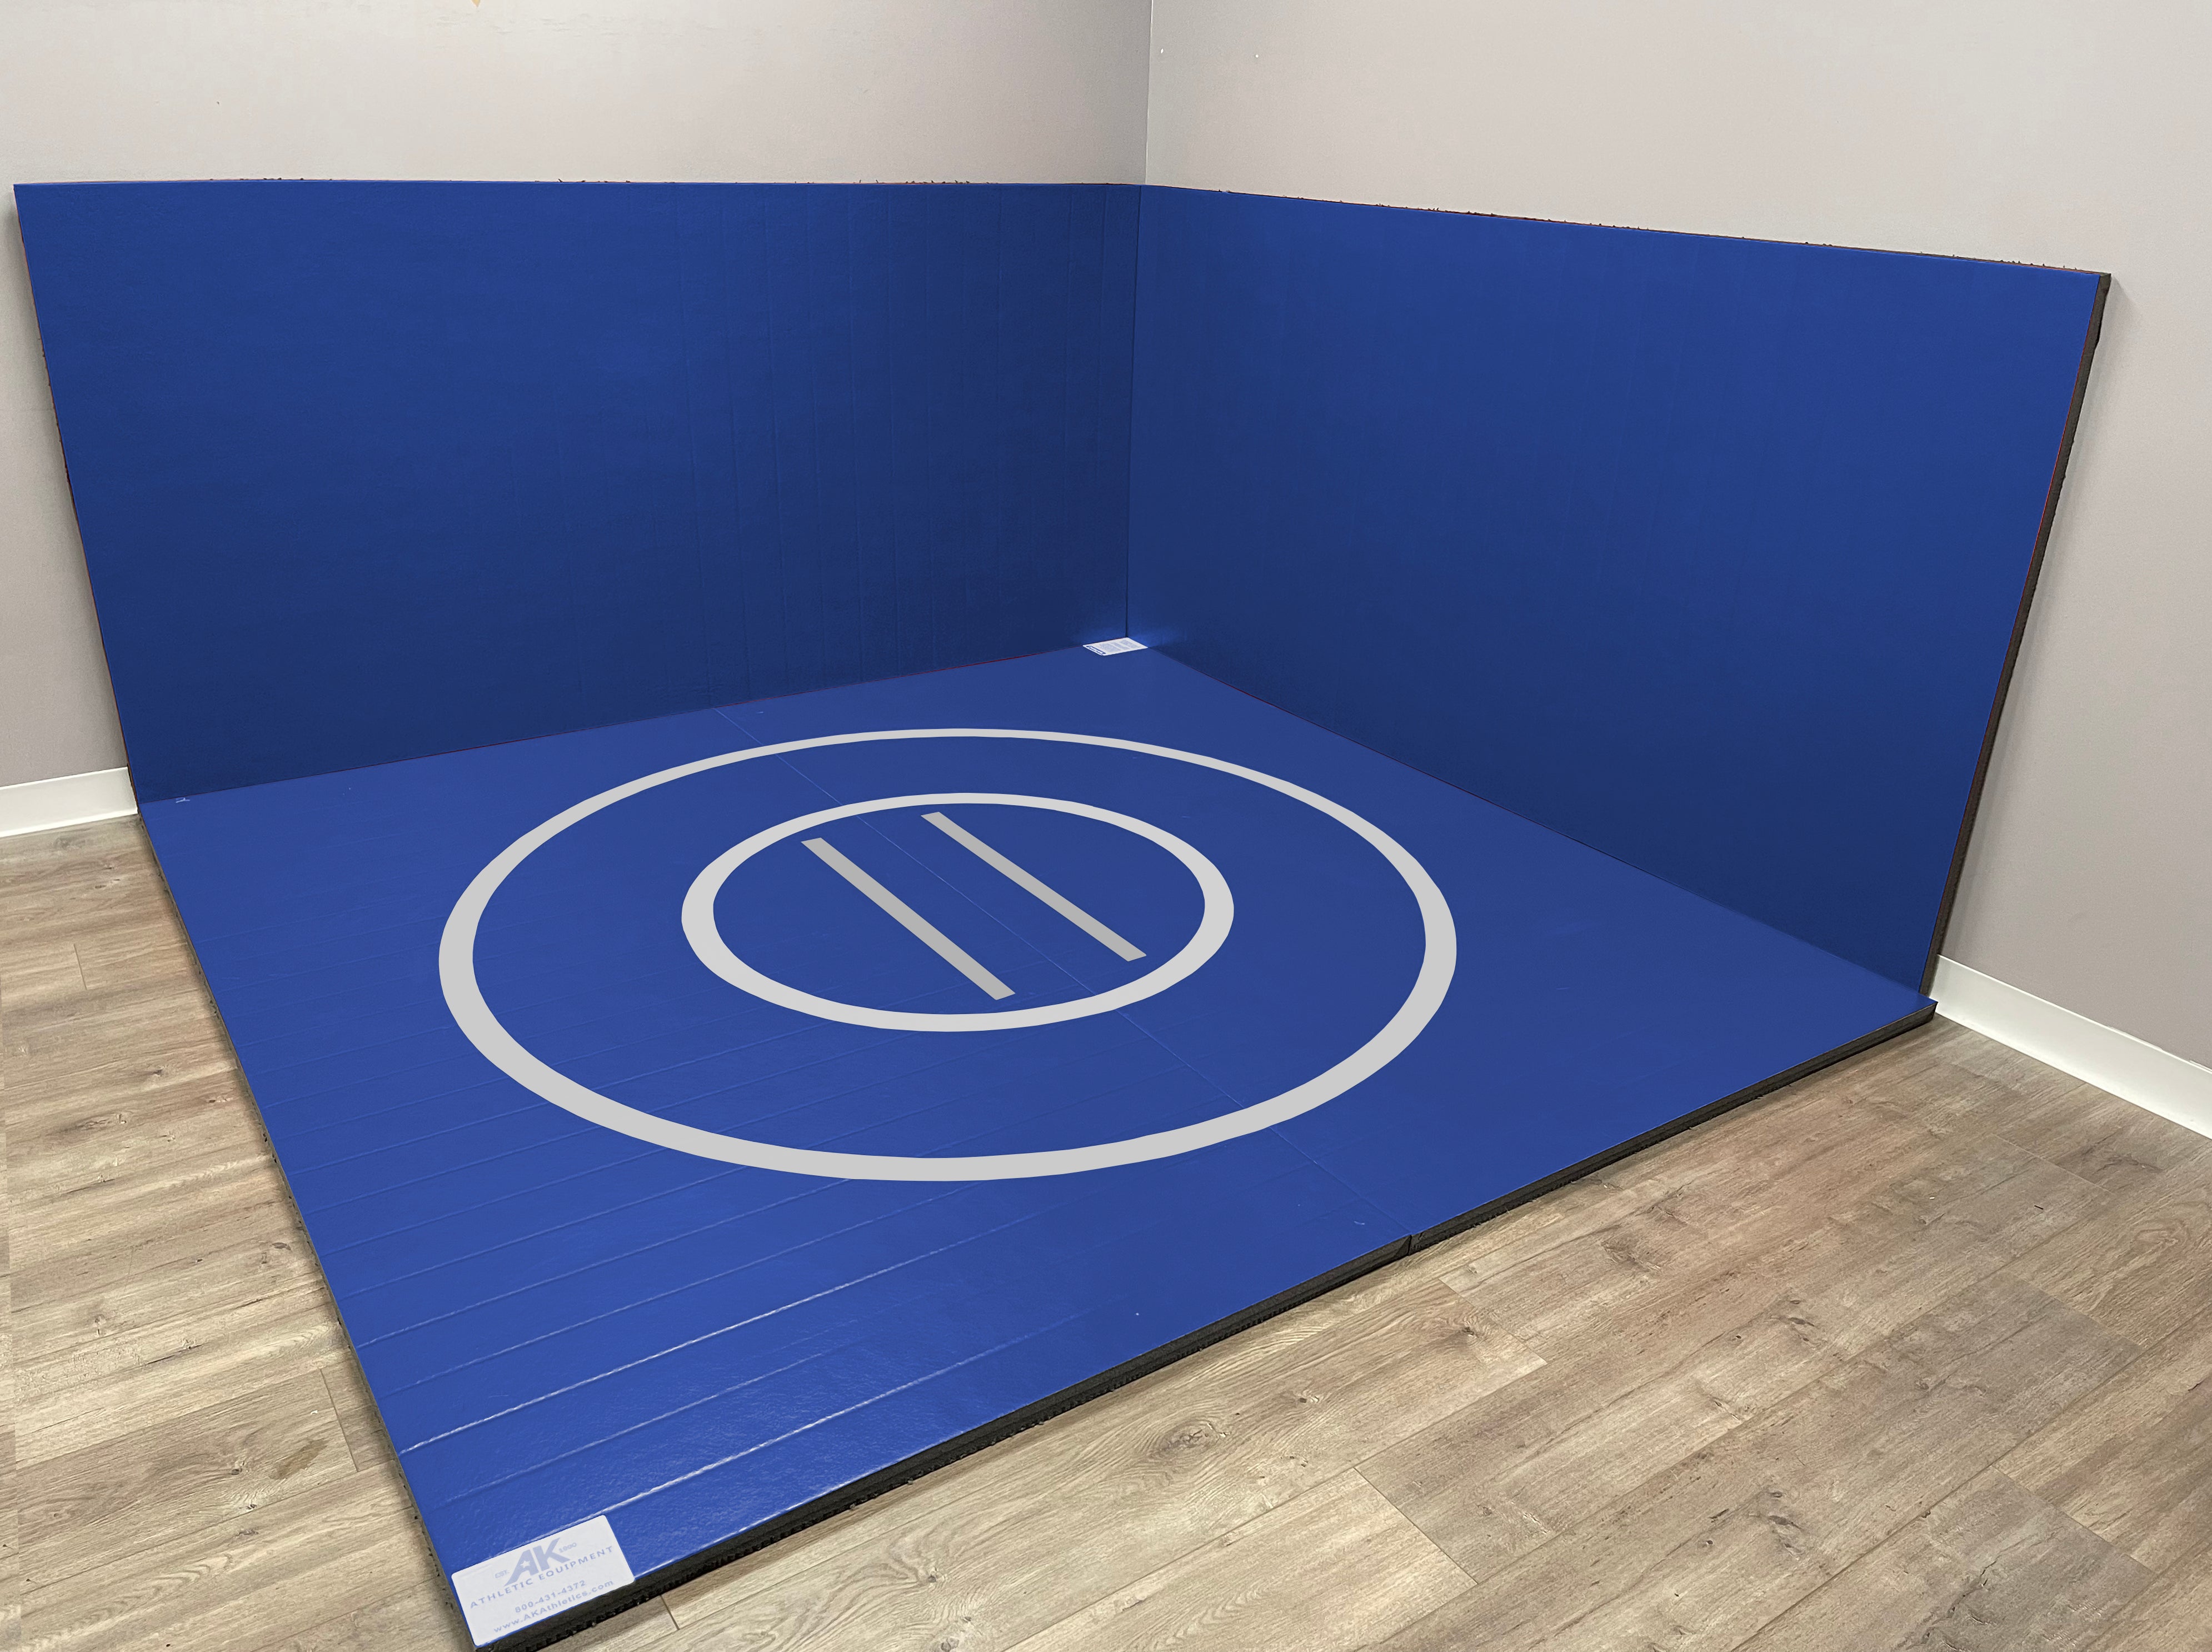 Instant Wrestling Room 8' x 8' wrestling mat and Removable Roll Up Wal